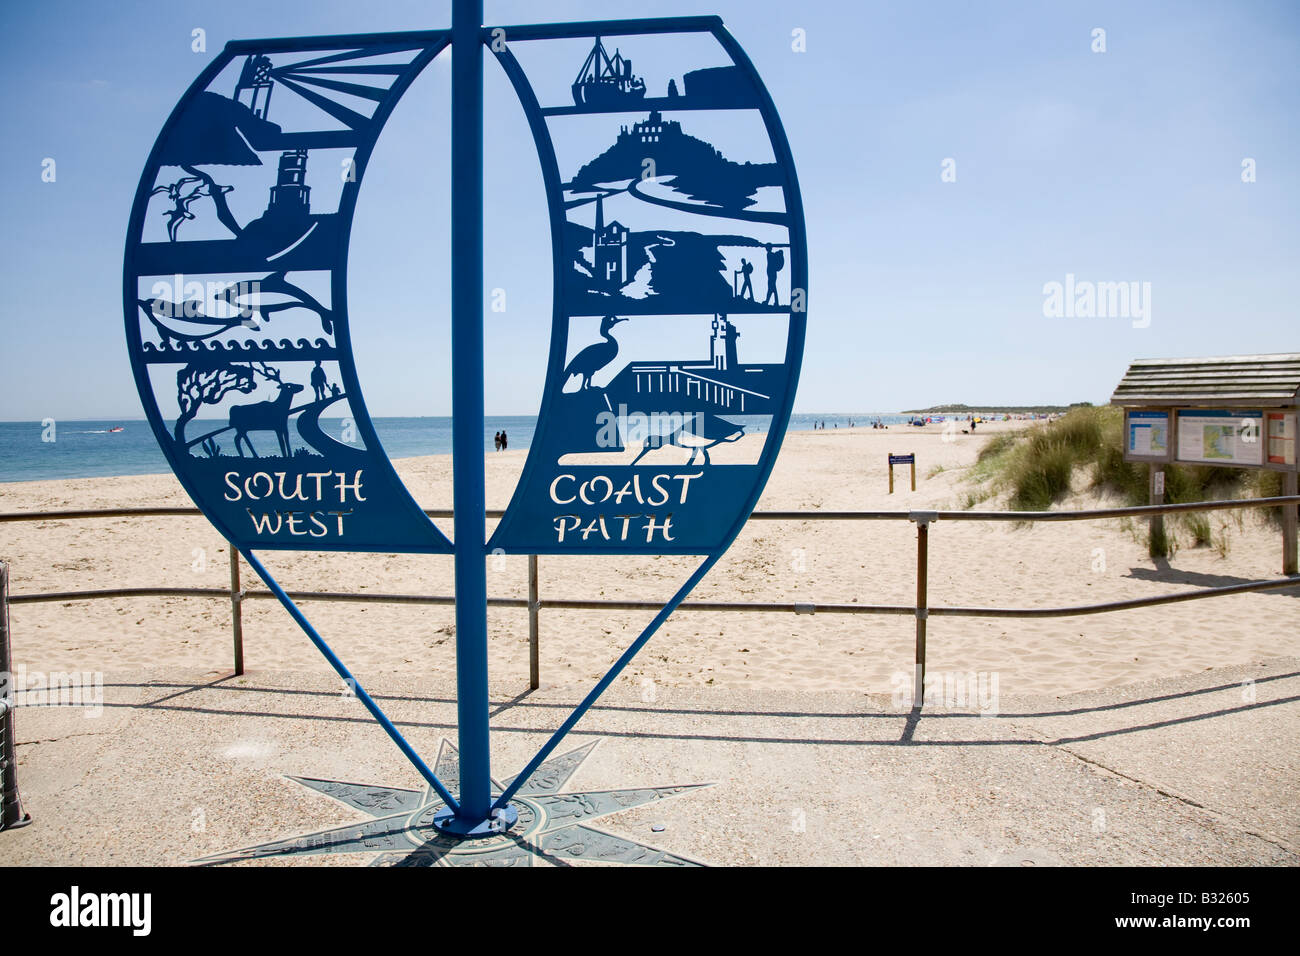 sign signifying the start of the South West Coast path for walkers at the East end of Studland beach Dorset England UK Stock Photo